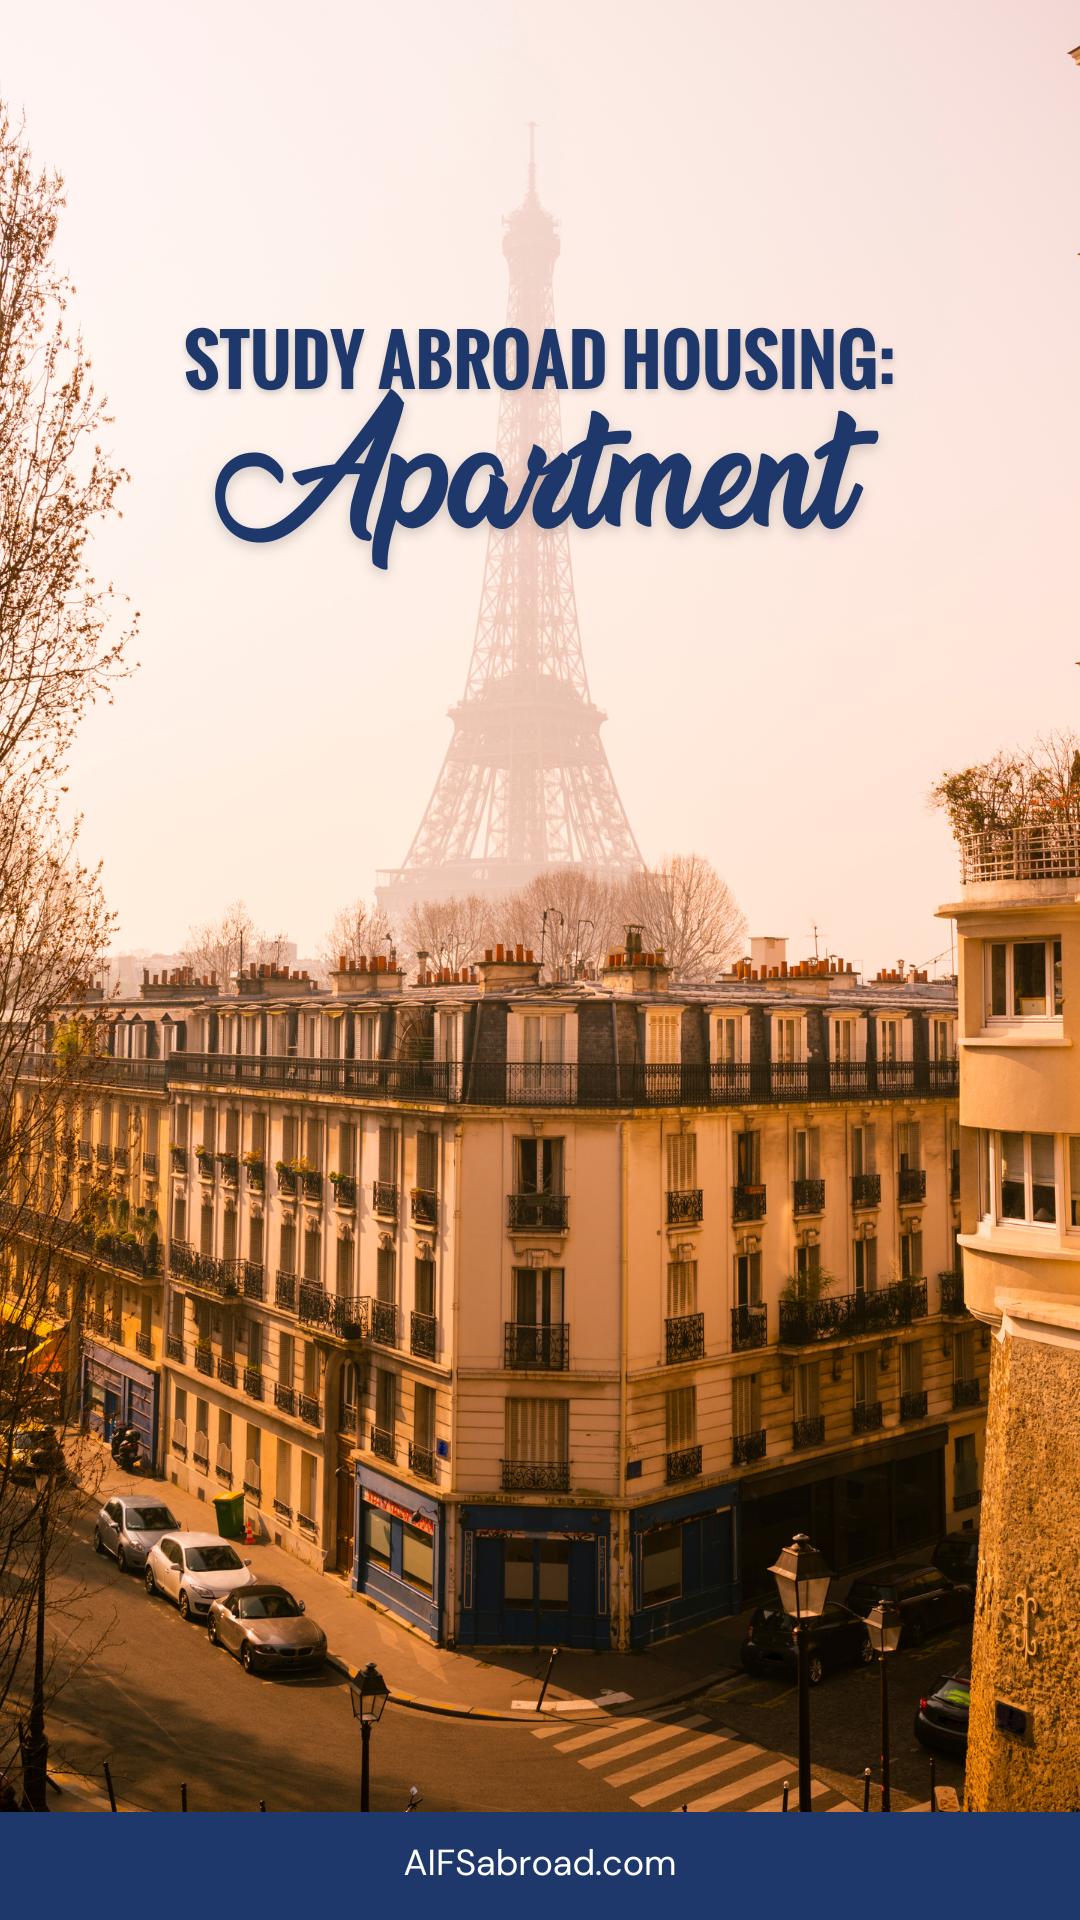 Pin image: Apartment building in Paris with Eiffel Tower in background with text overlay "Study Abroad Housing: Apartment" 